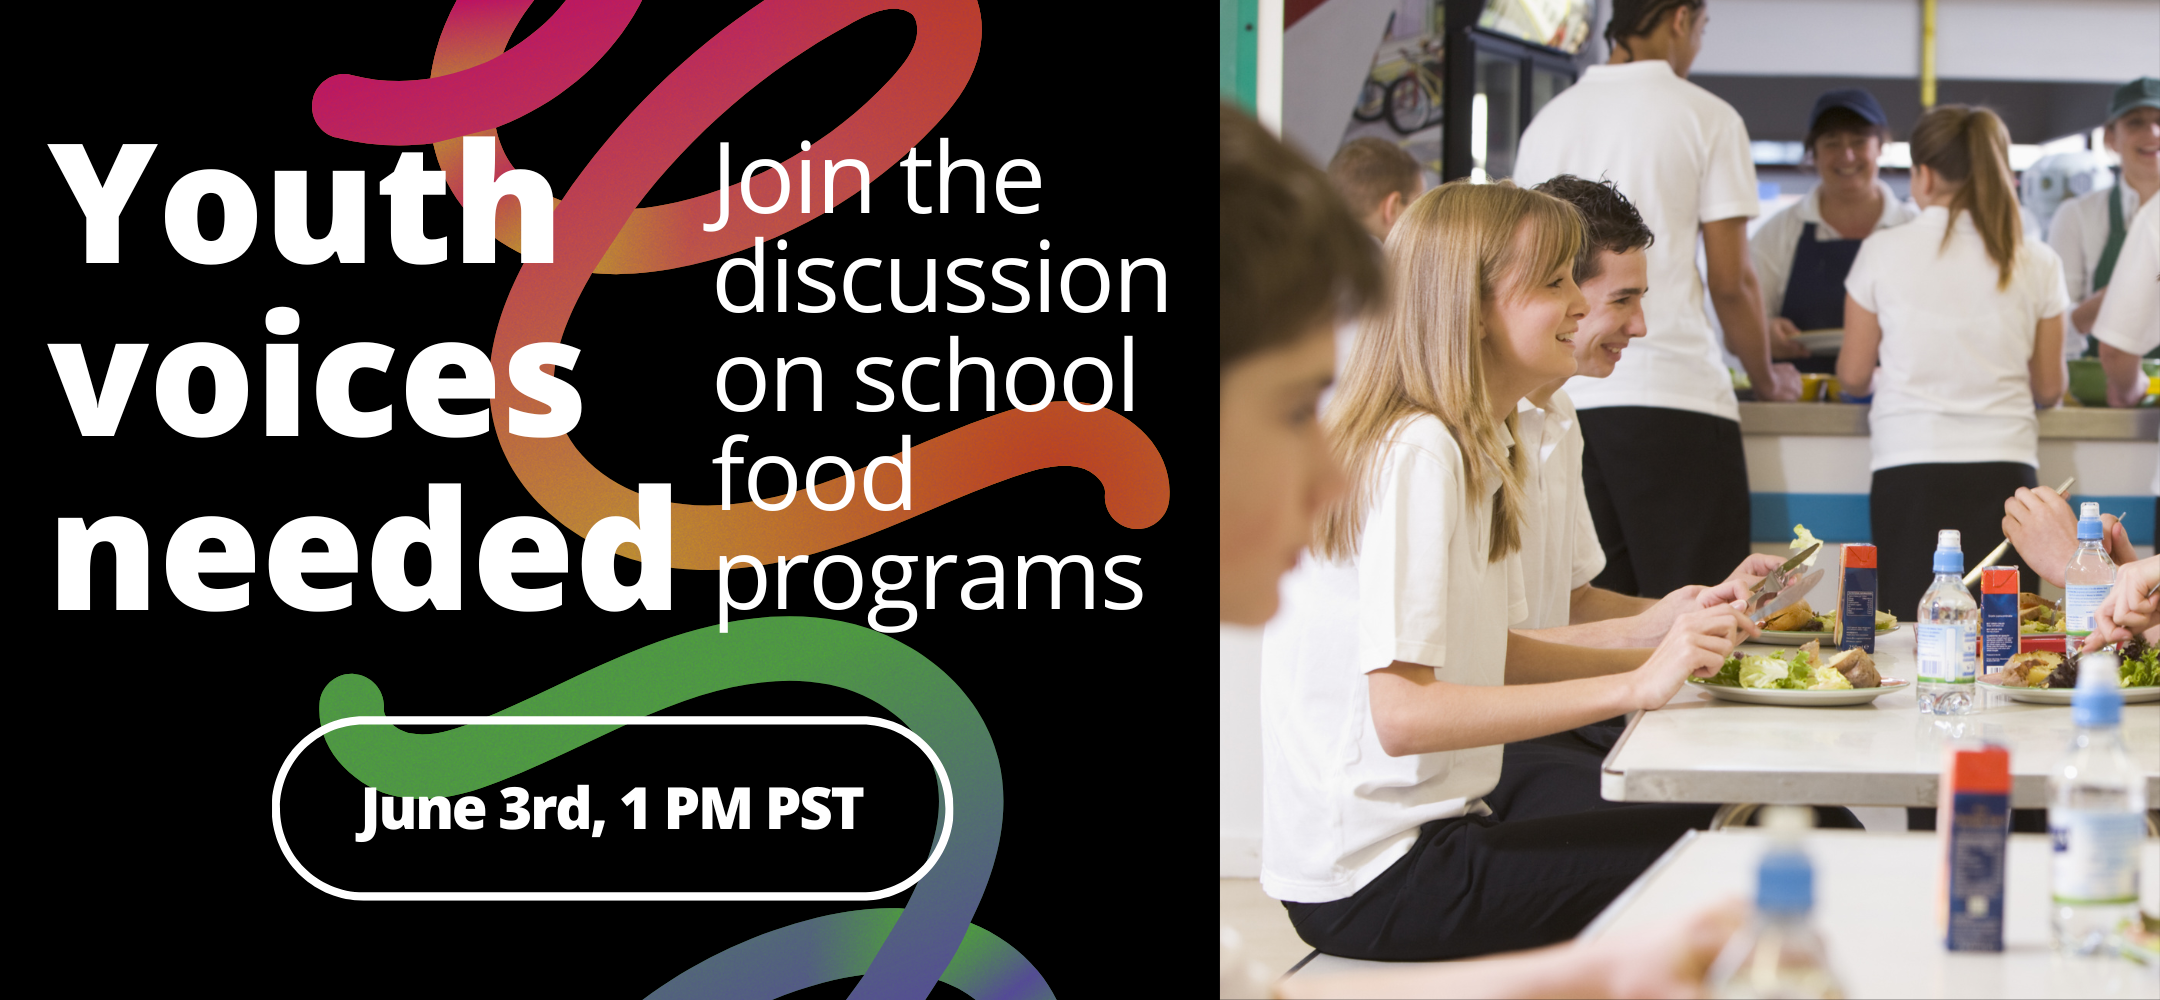 Join the discussion on school food programs (1080 × 500 px)